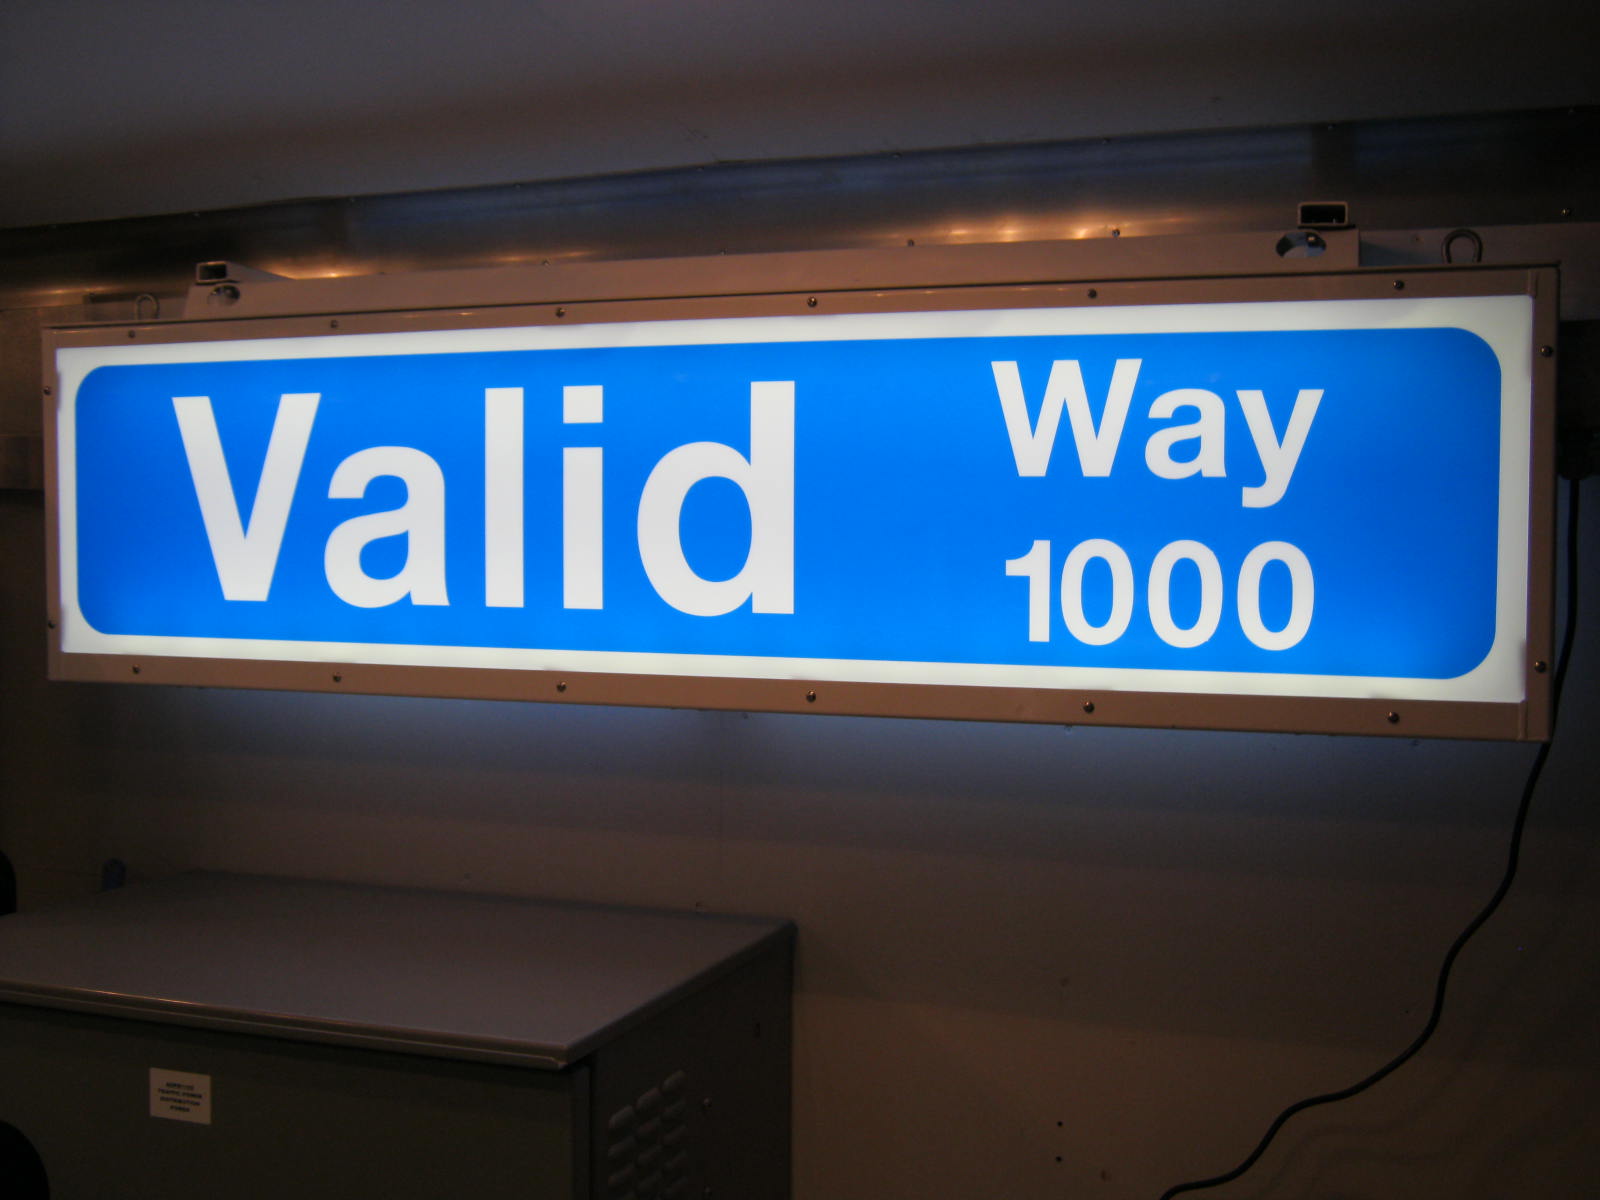 Blue Illuminated Street Sign with the text "Valid Way 1000" on the sign.